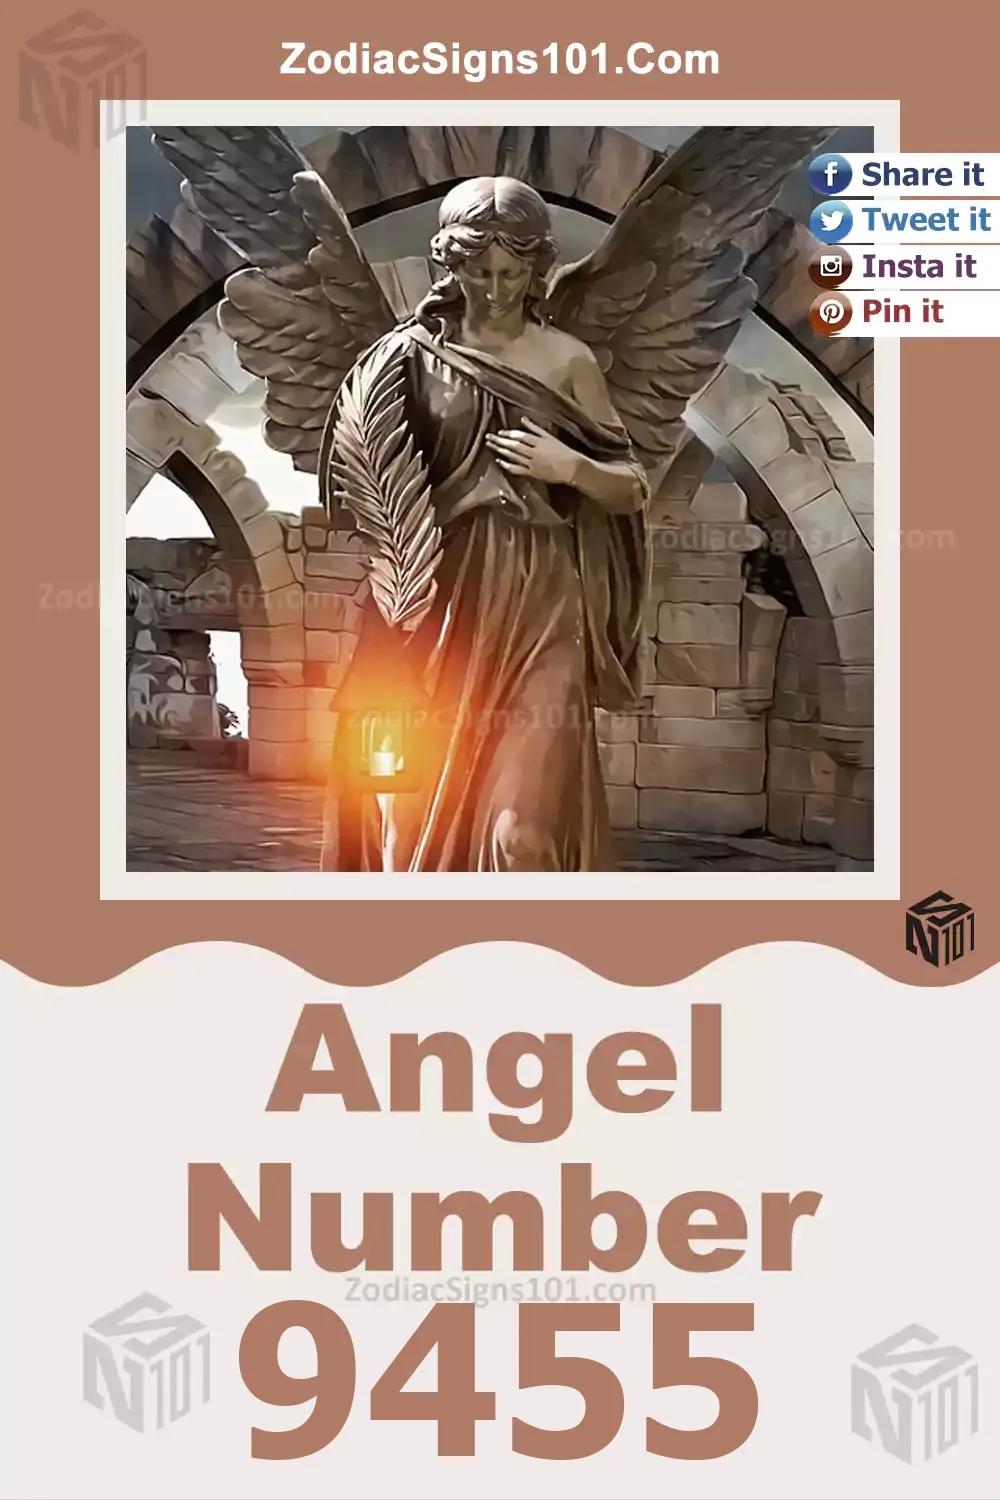 9455 Angel Number Meaning